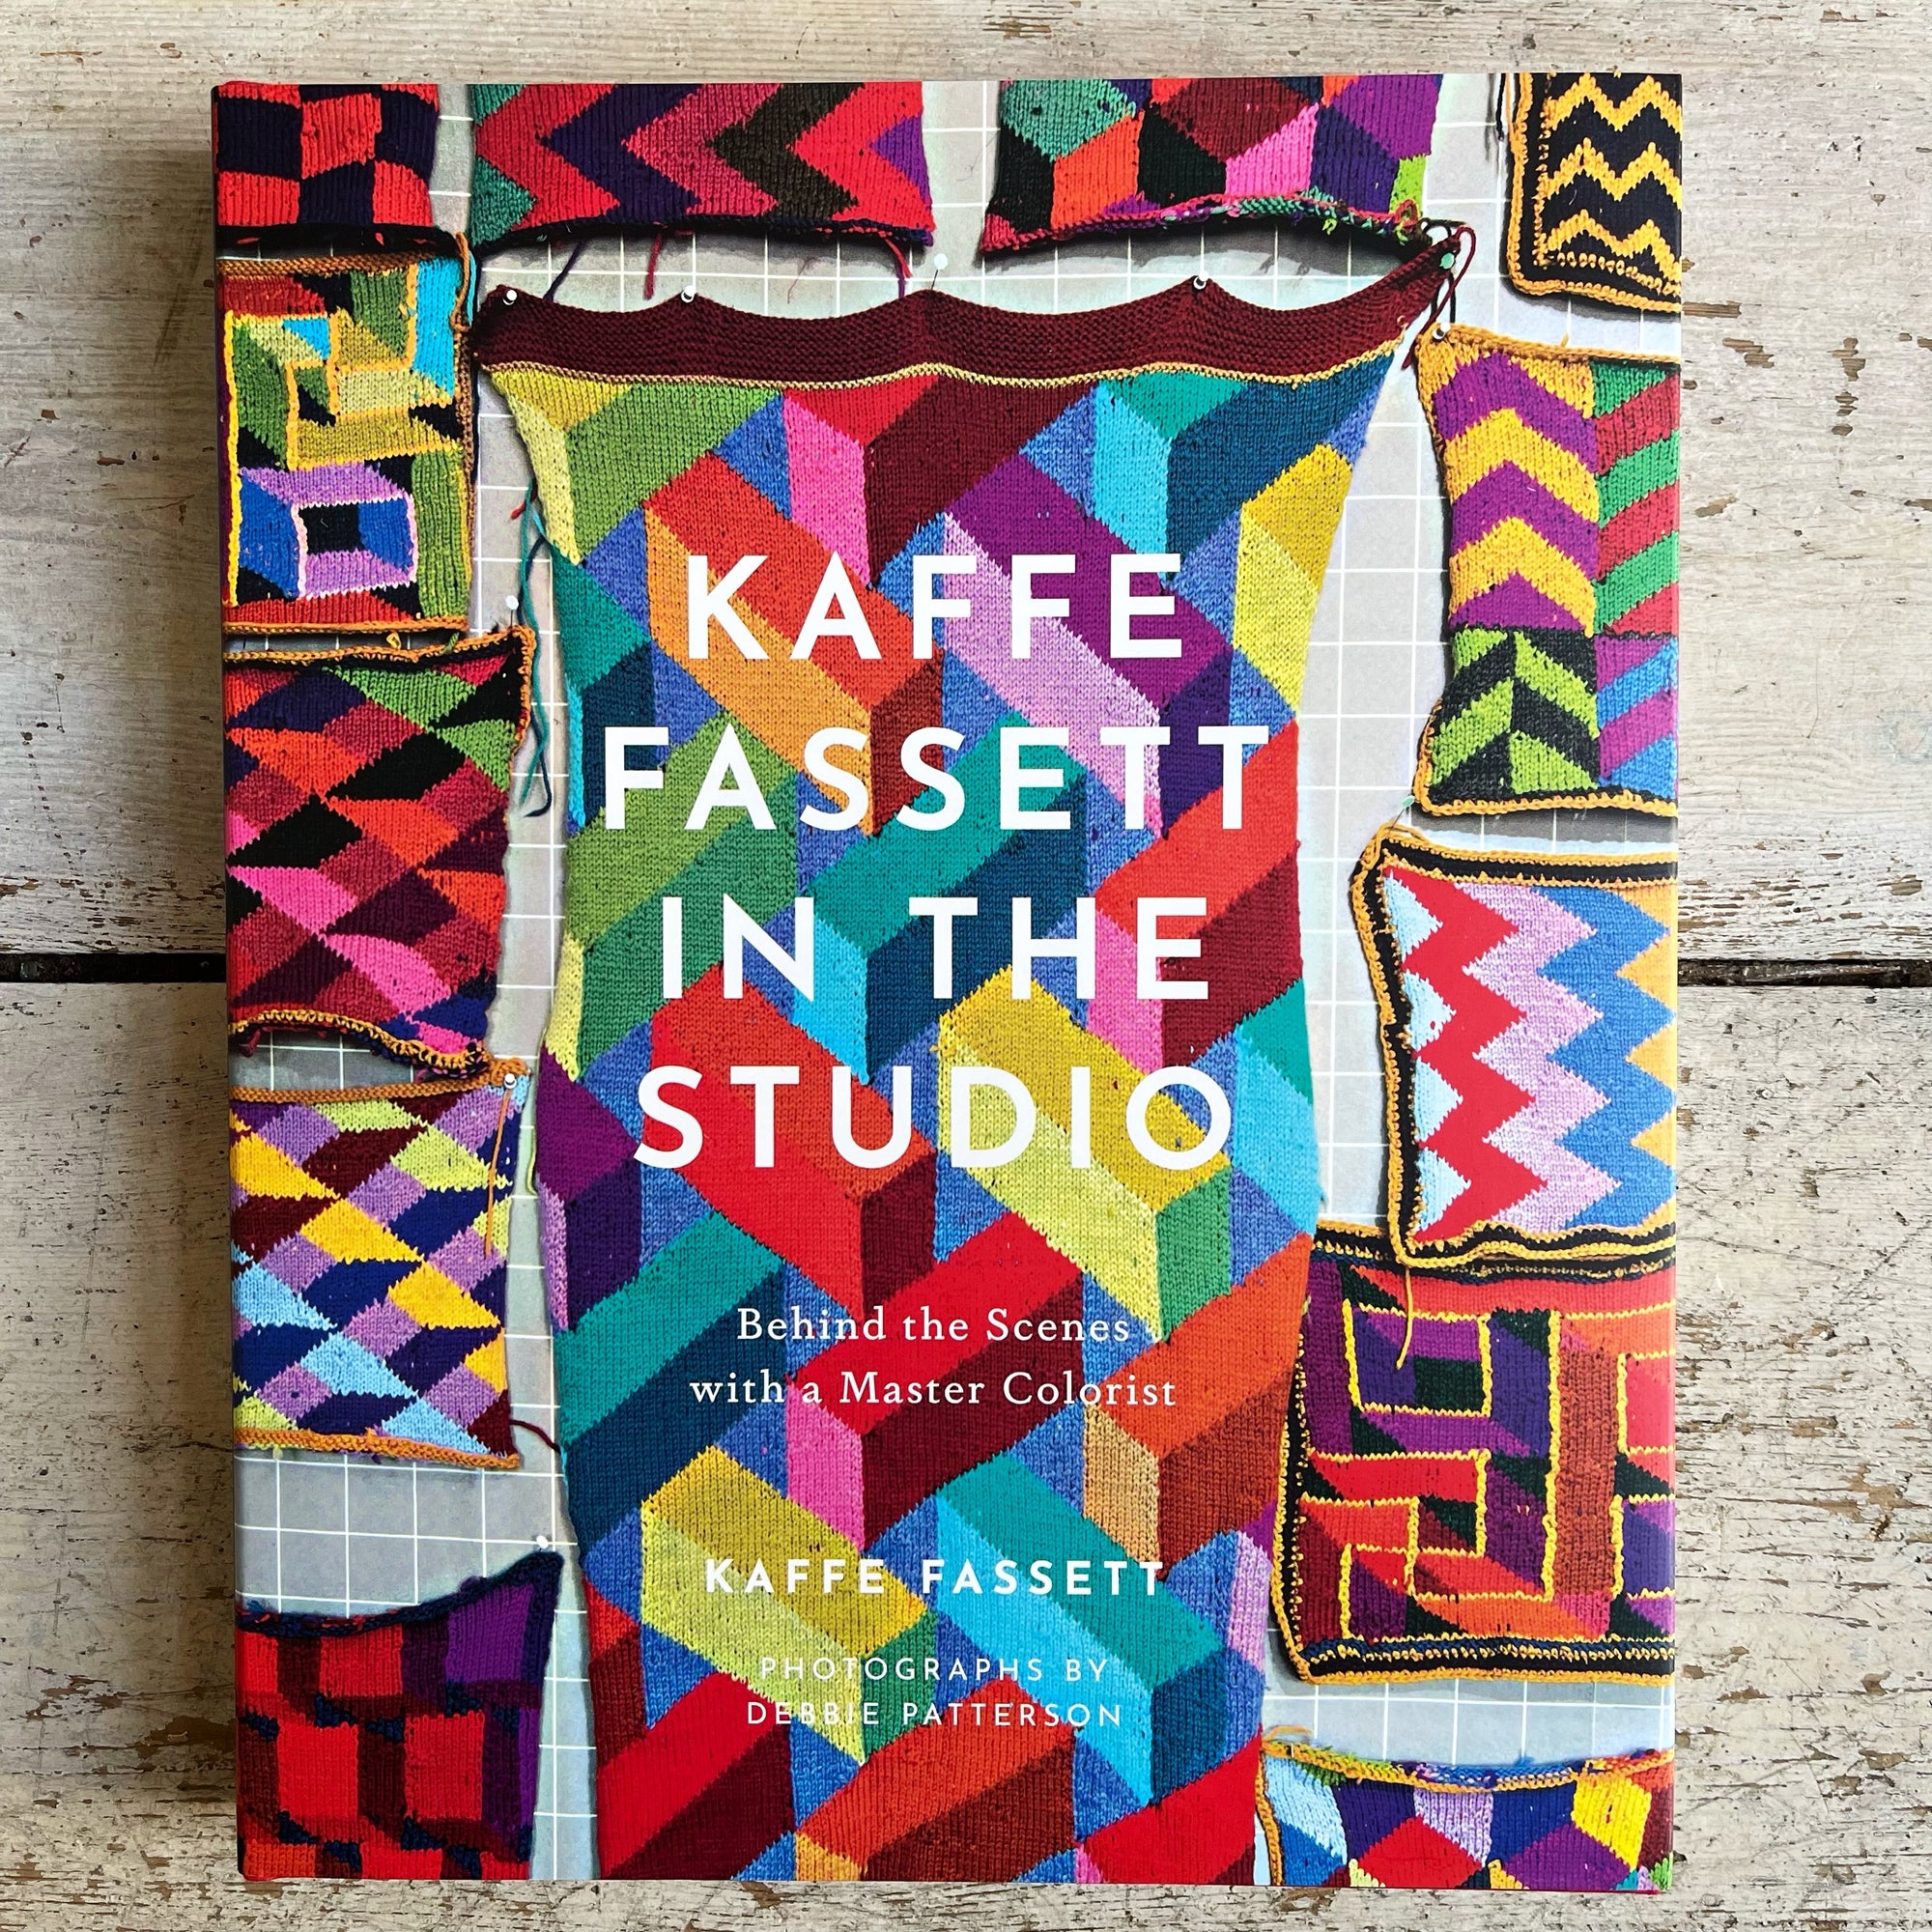 Kaffe Fassett in the Studio: Behind the Scenes with a Master Colorist Search Press